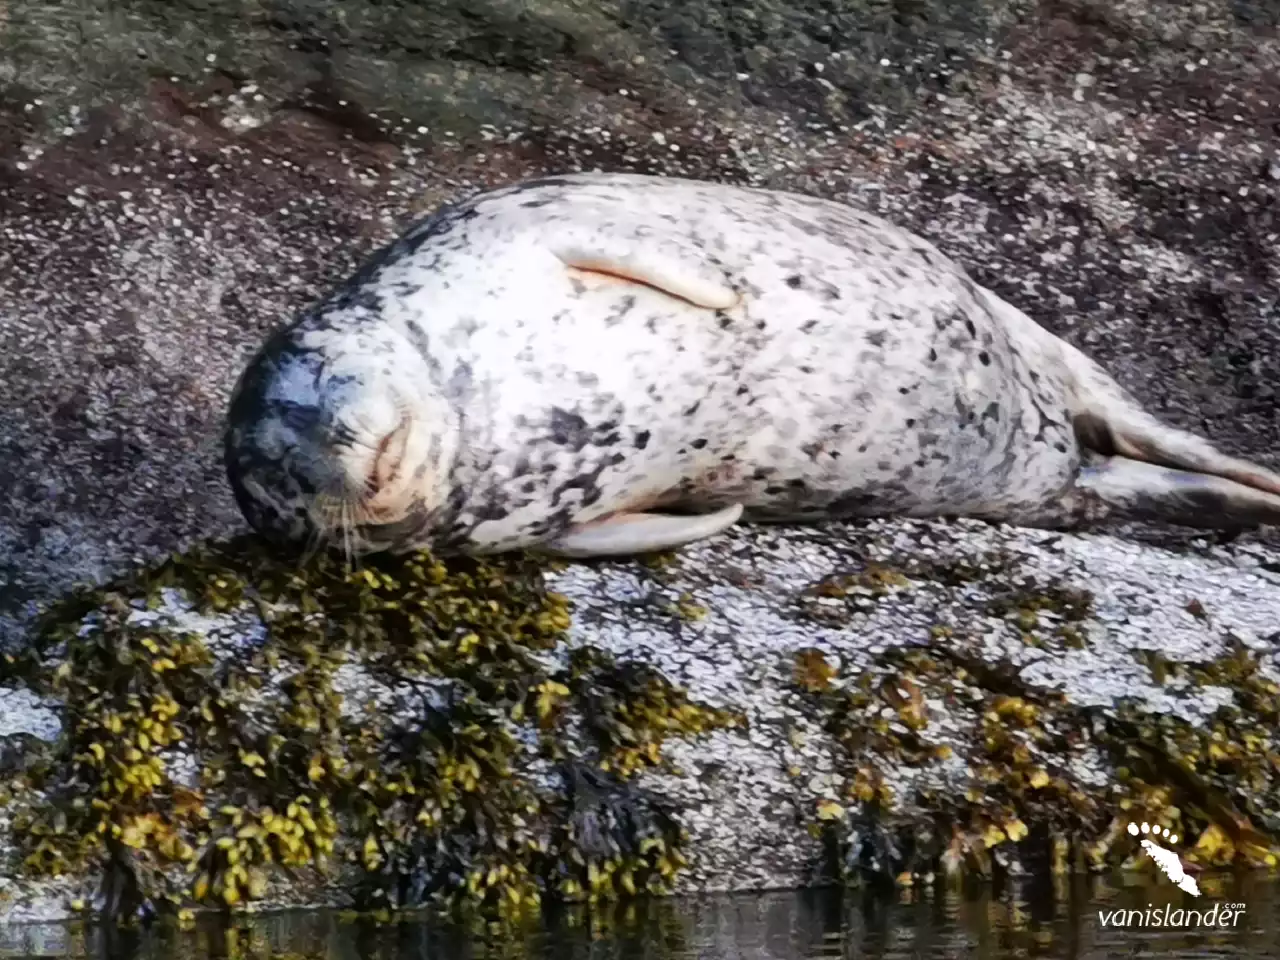 A sea lion resting on the rocks near the water,  Vancouver Island